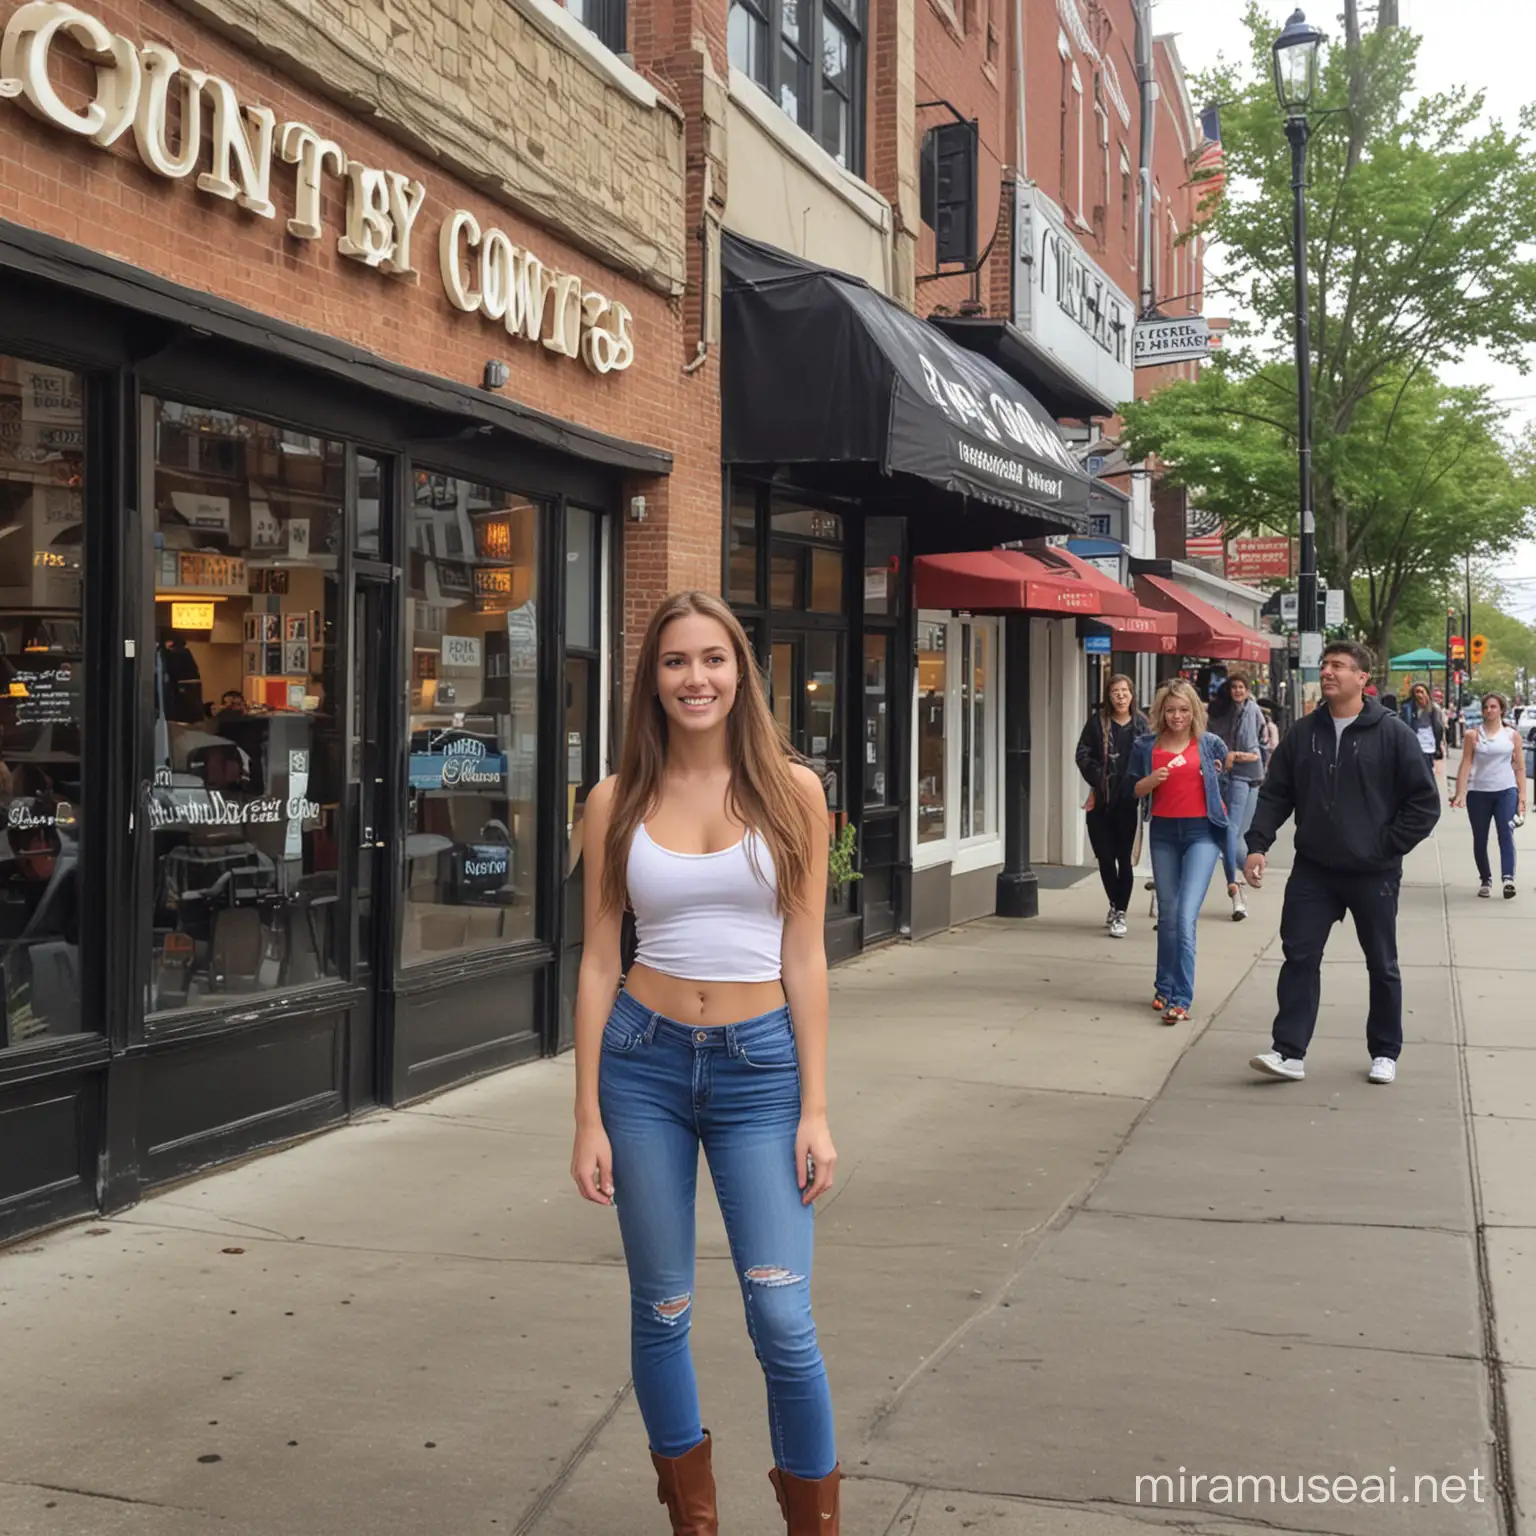 College Girl Enjoying Downtown Fairfield CT Outside Country Cow